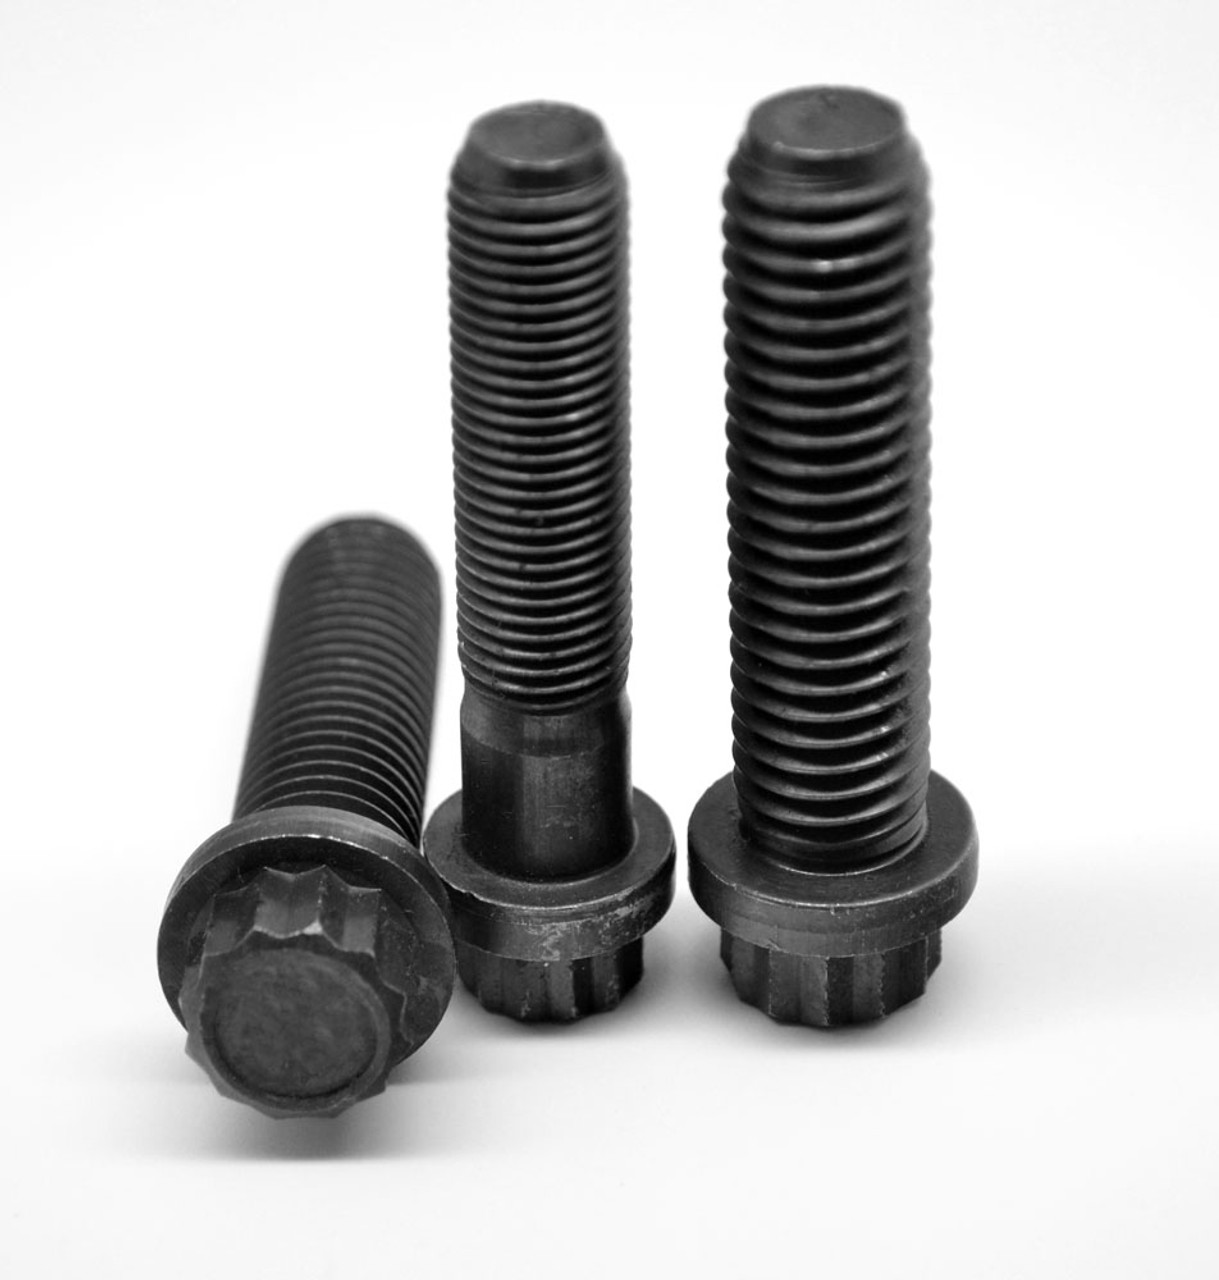 1/2-13 x 8 Coarse Thread 12-Point Flange Screw Alloy Steel Thermal Black Oxide